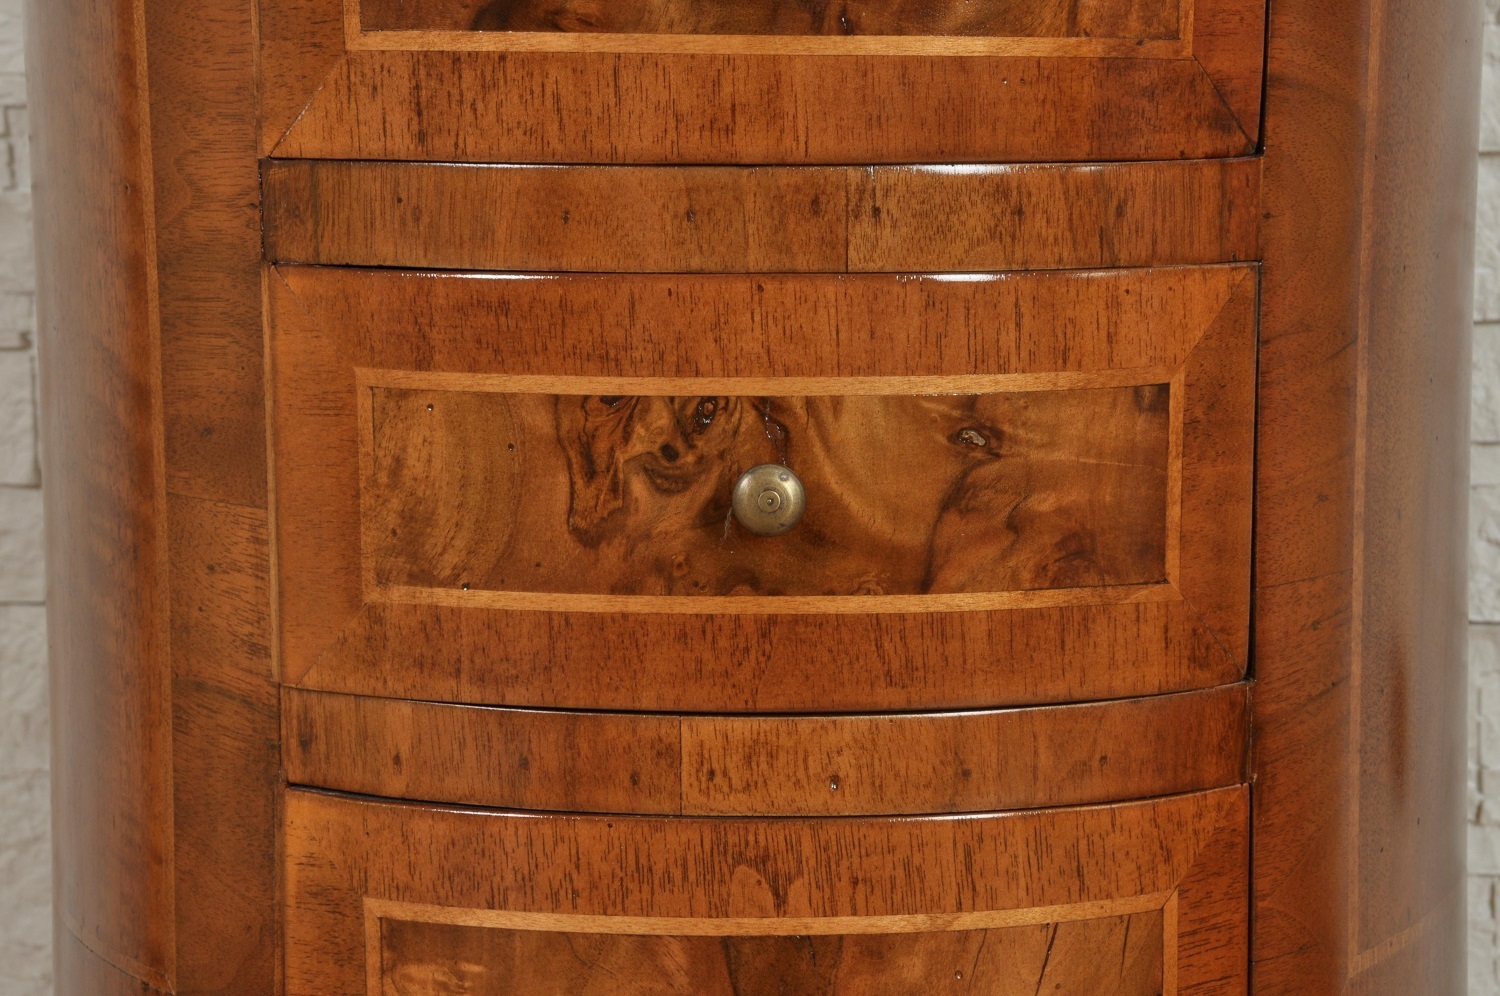 hand carved legs of the cabinet inlaid in walnut with a round cylinder shape luxury furnishings handmade in Italy